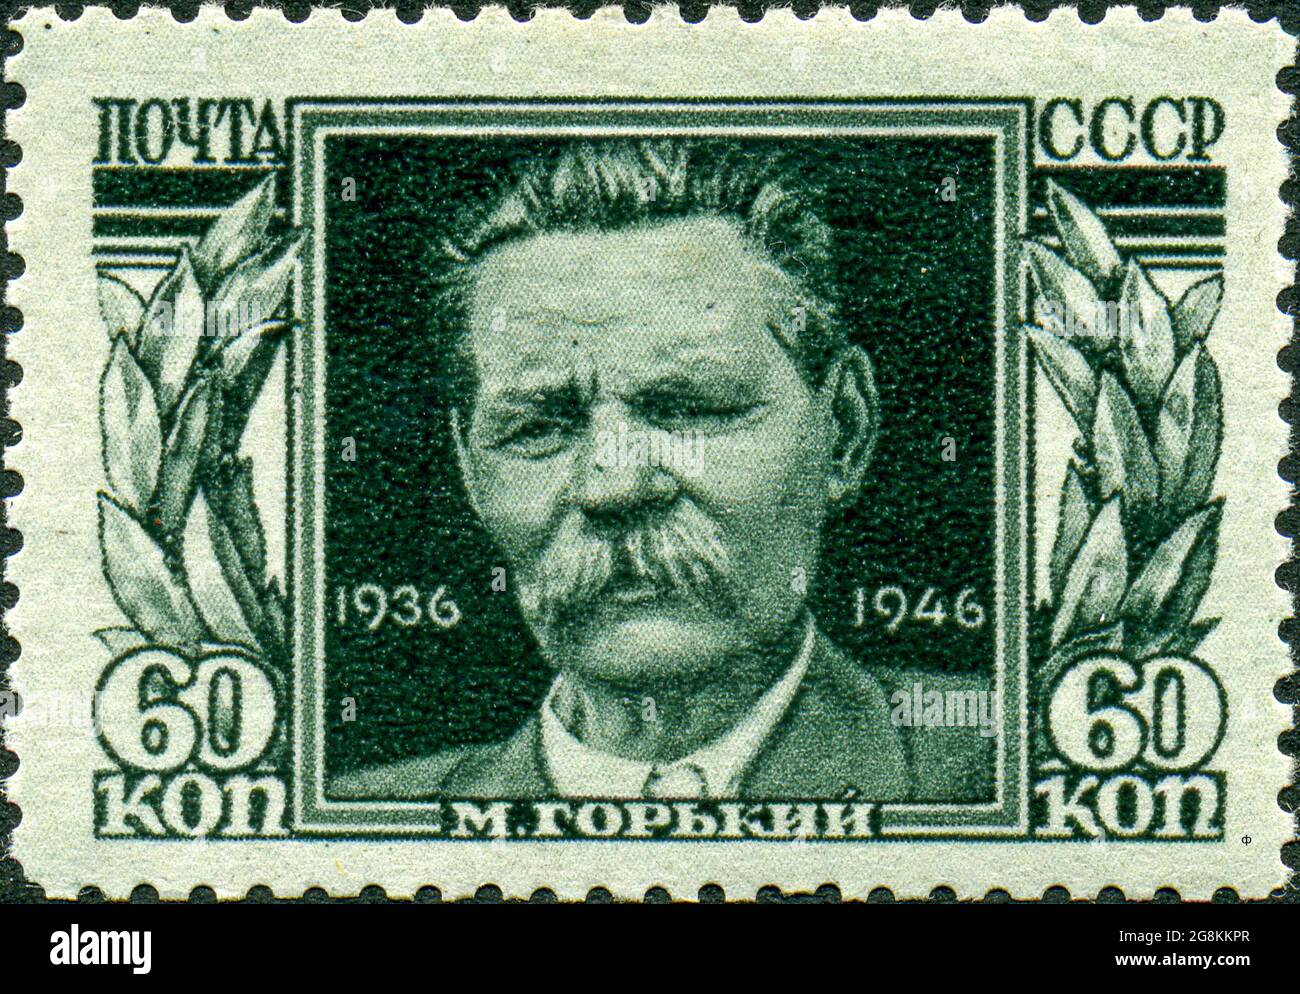 Maksim Gorky on former USSR stamp. Alexei Maximovich Peshkov (Russian: 28 March 1868 – 18 June 1936), primarily known as Maxim Gorky, was a Russian and Soviet writer, a founder of the socialist realism literary method, and a political activist. He was also a five-time nominee for the Nobel Prize in Literature. Stock Photo